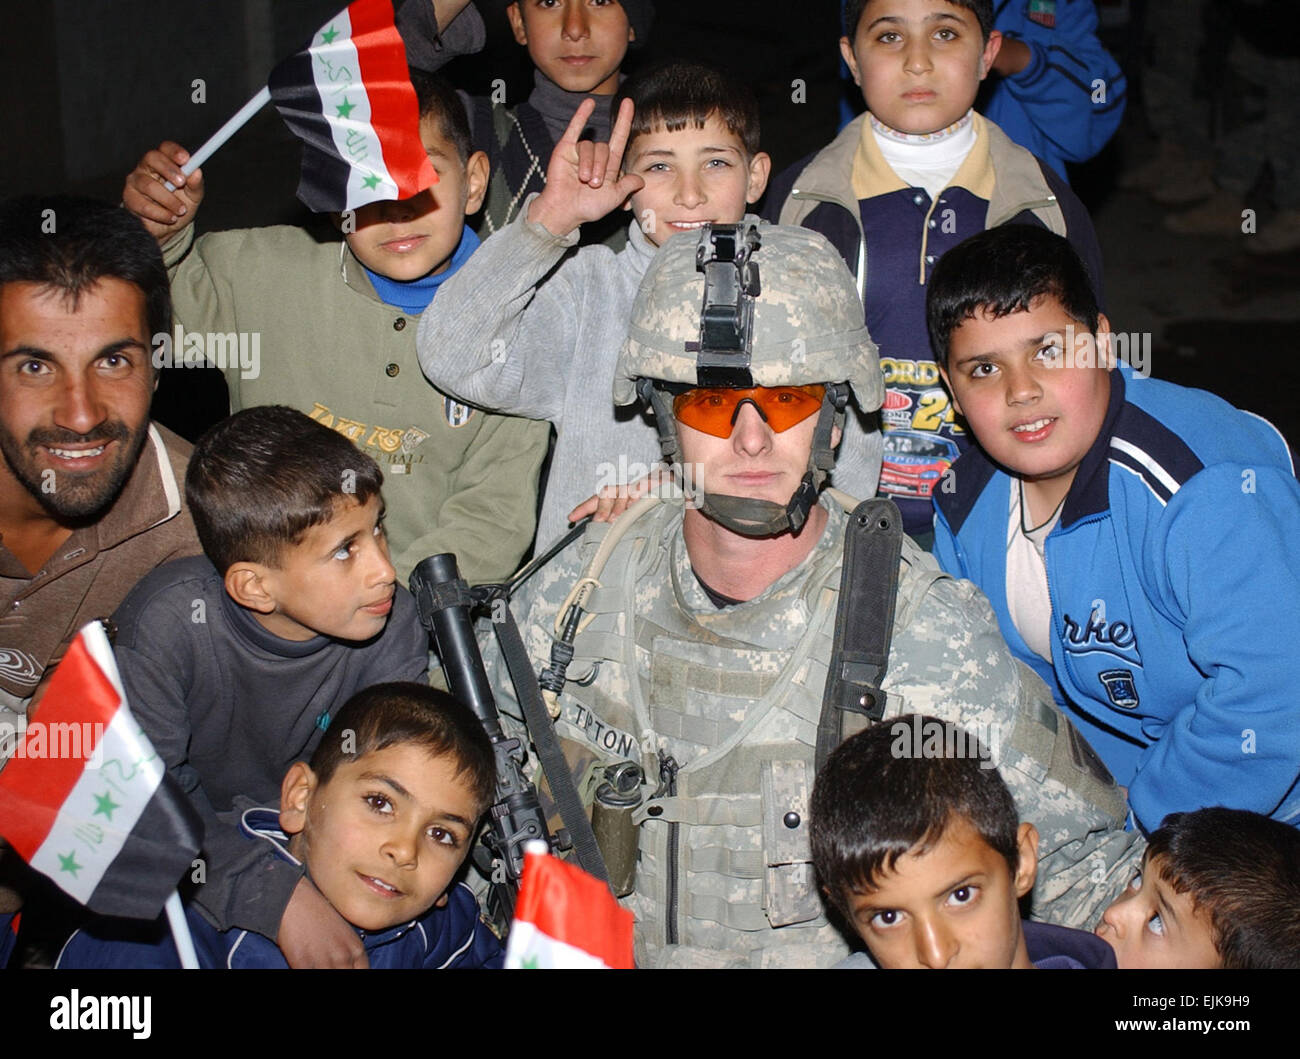 U.S. Army Spc. Chad Tipton, from 1st Squadron, 8th Cavalry Regiment, 2nd Brigade Combat Team, 2nd Infantry Division, poses for a photo with Iraqi children during a humanitarian operation in the Baladiat area of East Baghdad, Iraq, Jan. 7, 2008. U.S Army photo by Spc. Davis Pridgen Stock Photo